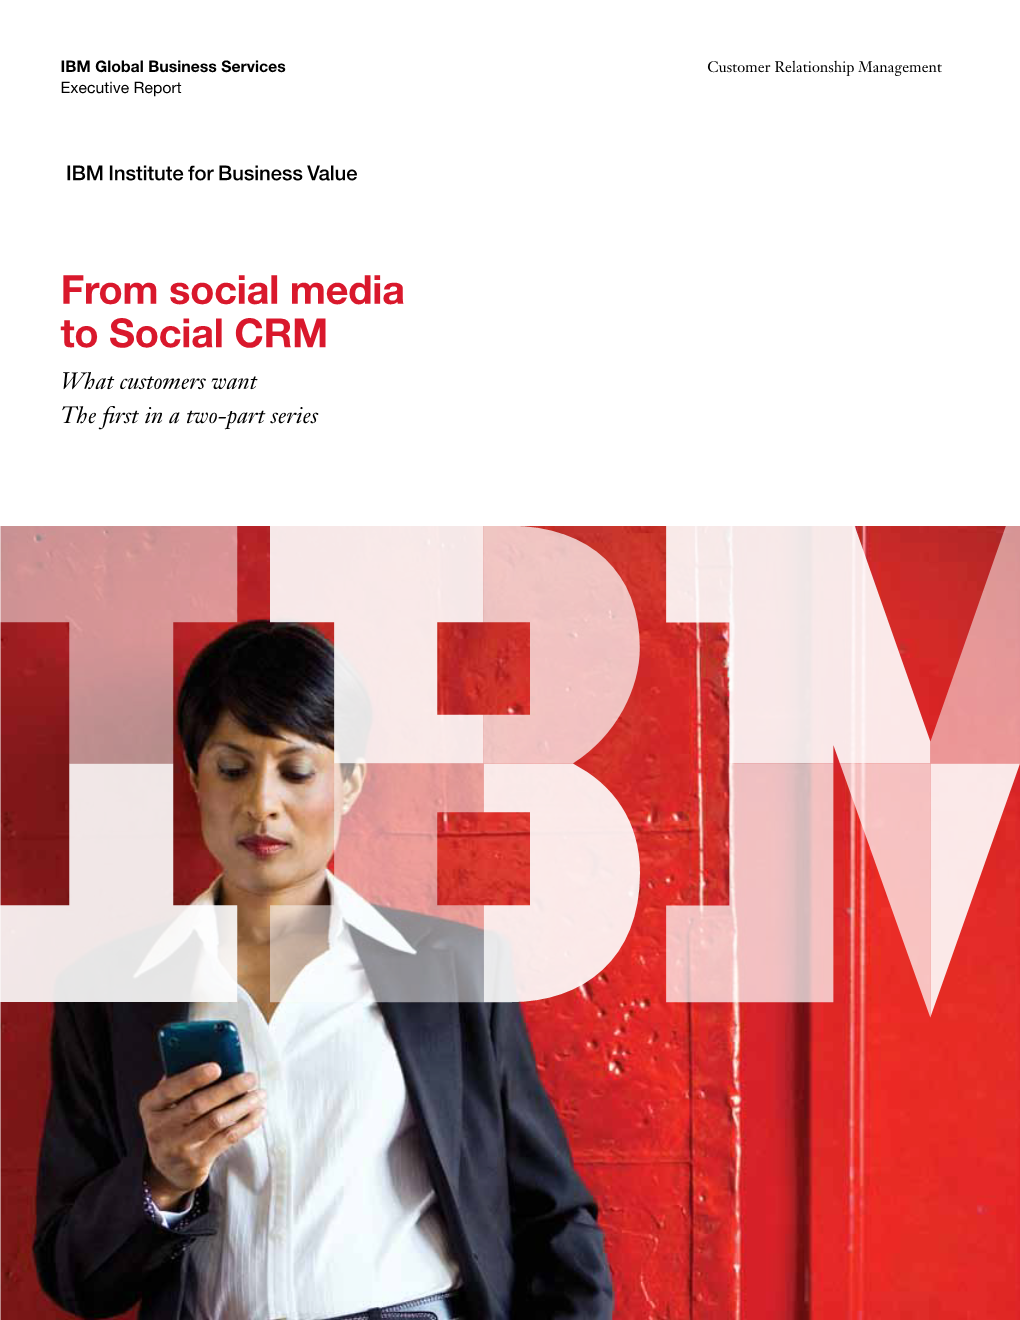 From Social Media to Social CRM: What Customers Want Part 1